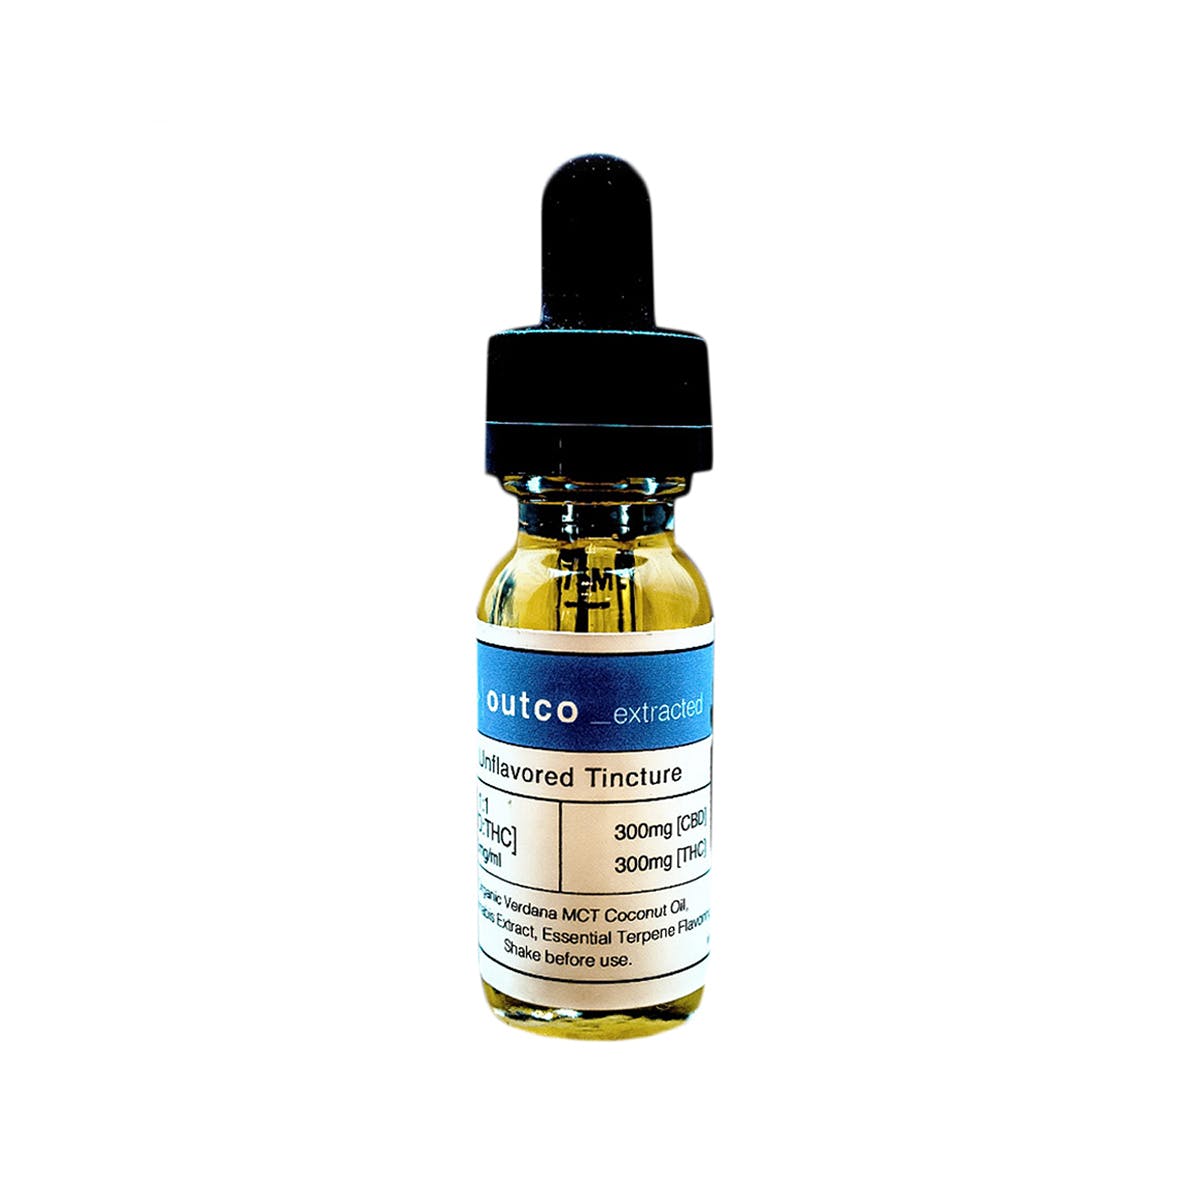 marijuana-dispensaries-west-coast-cannabis-club-in-cathedral-city-outco-unflavored-11-ratio-tincture